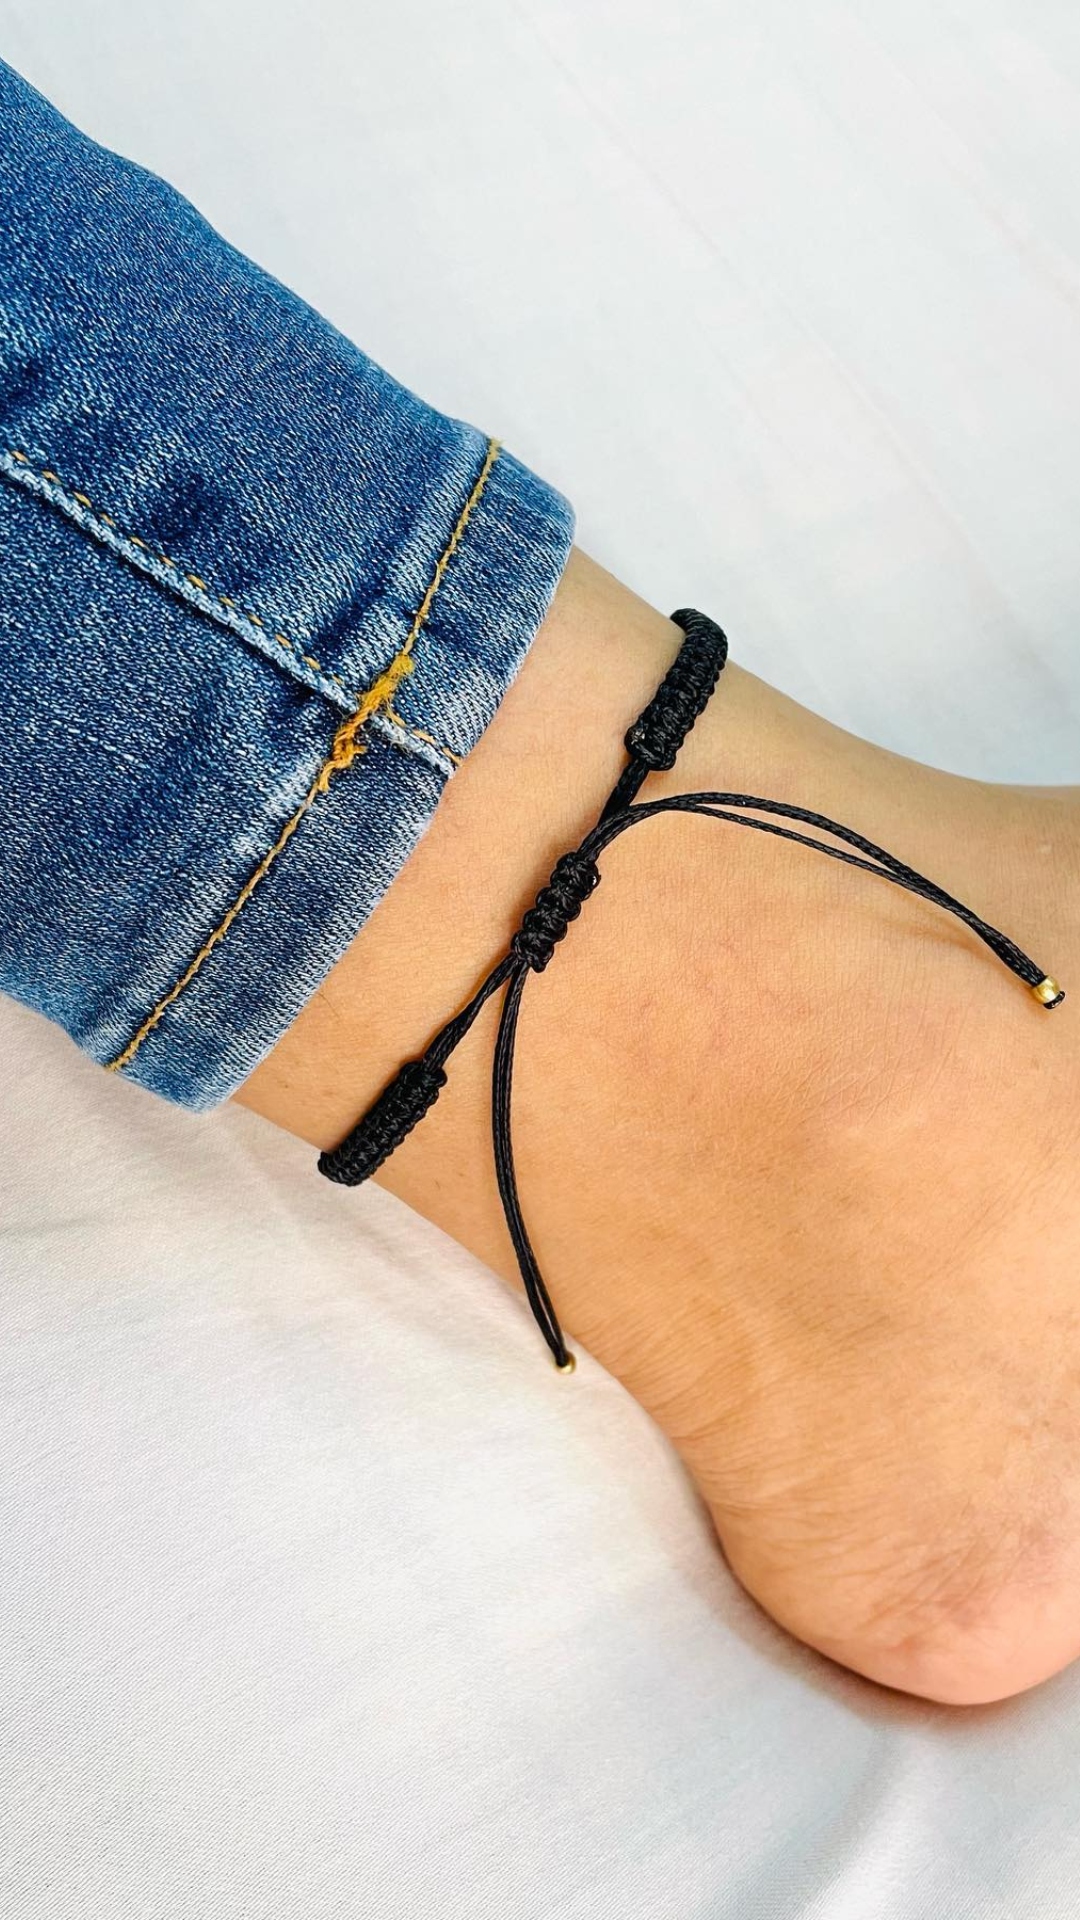 Why is black thread worn in the leg? Know its astrological and health benefits